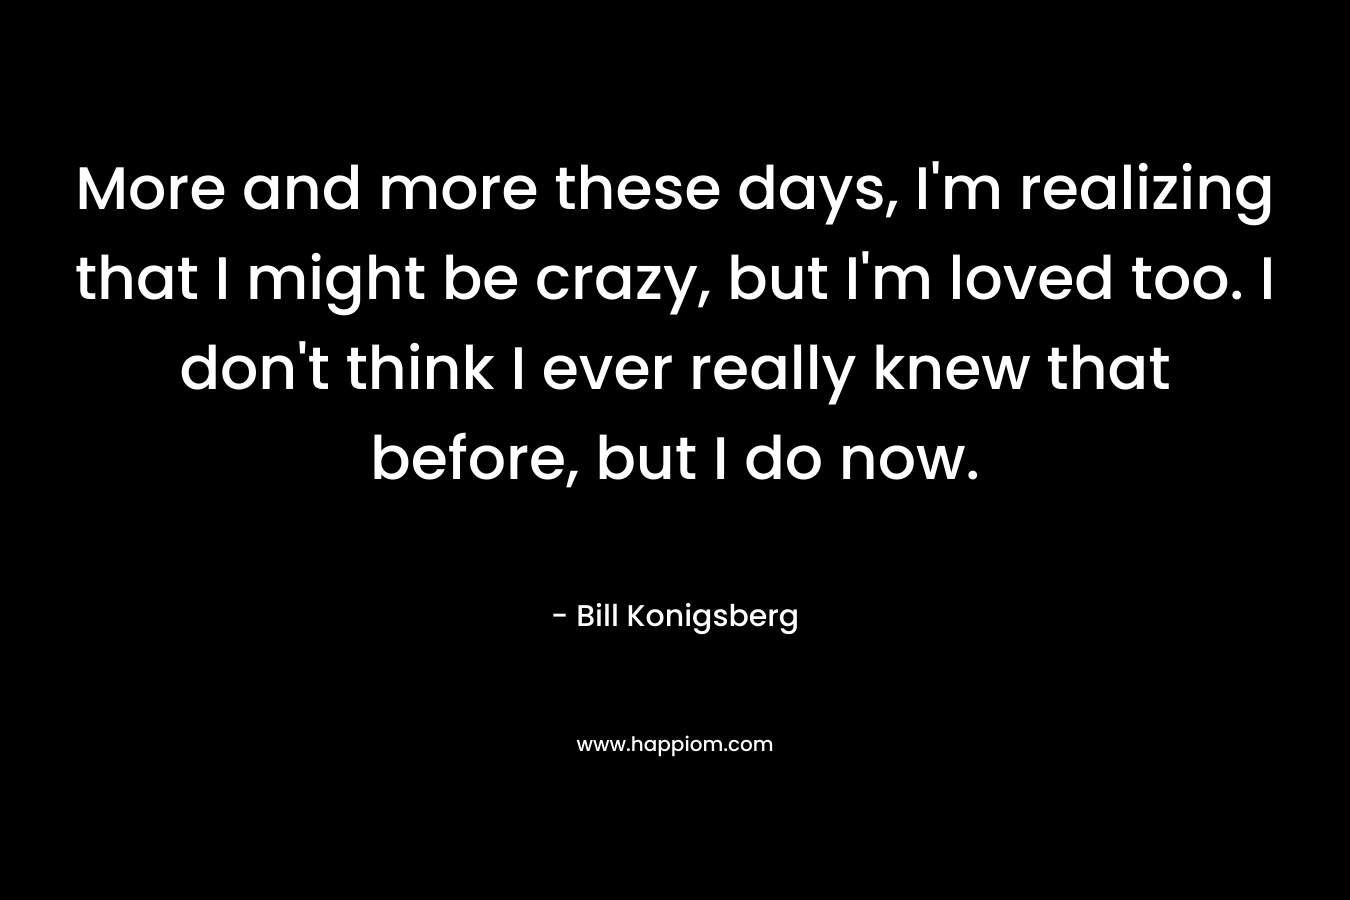 More and more these days, I’m realizing that I might be crazy, but I’m loved too. I don’t think I ever really knew that before, but I do now. – Bill Konigsberg